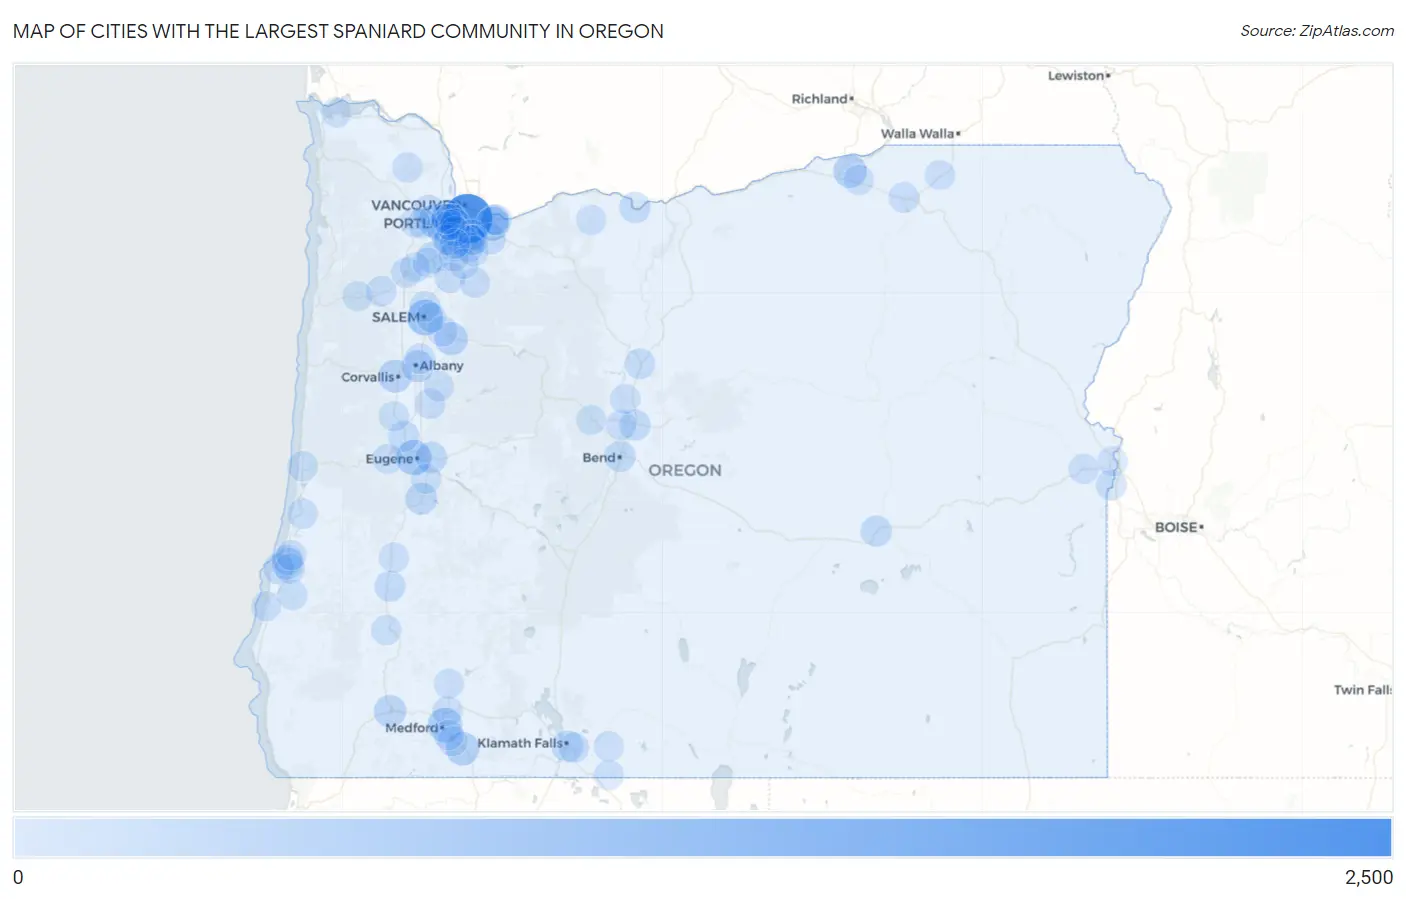 Cities with the Largest Spaniard Community in Oregon Map